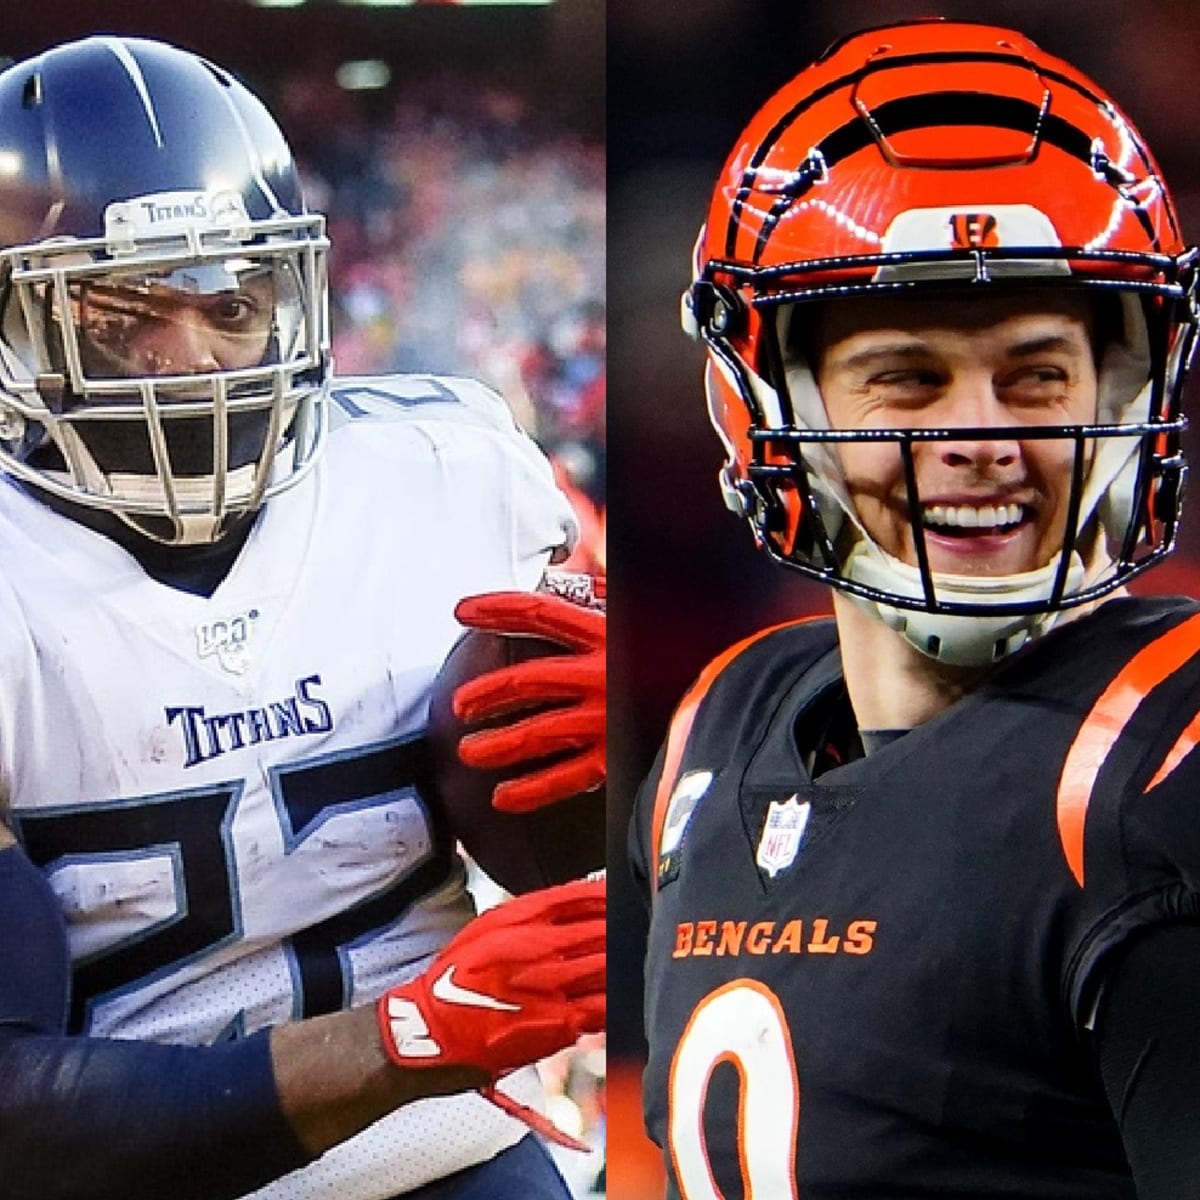 Here's what the Cincinnati Bengals must do to beat the Tennessee